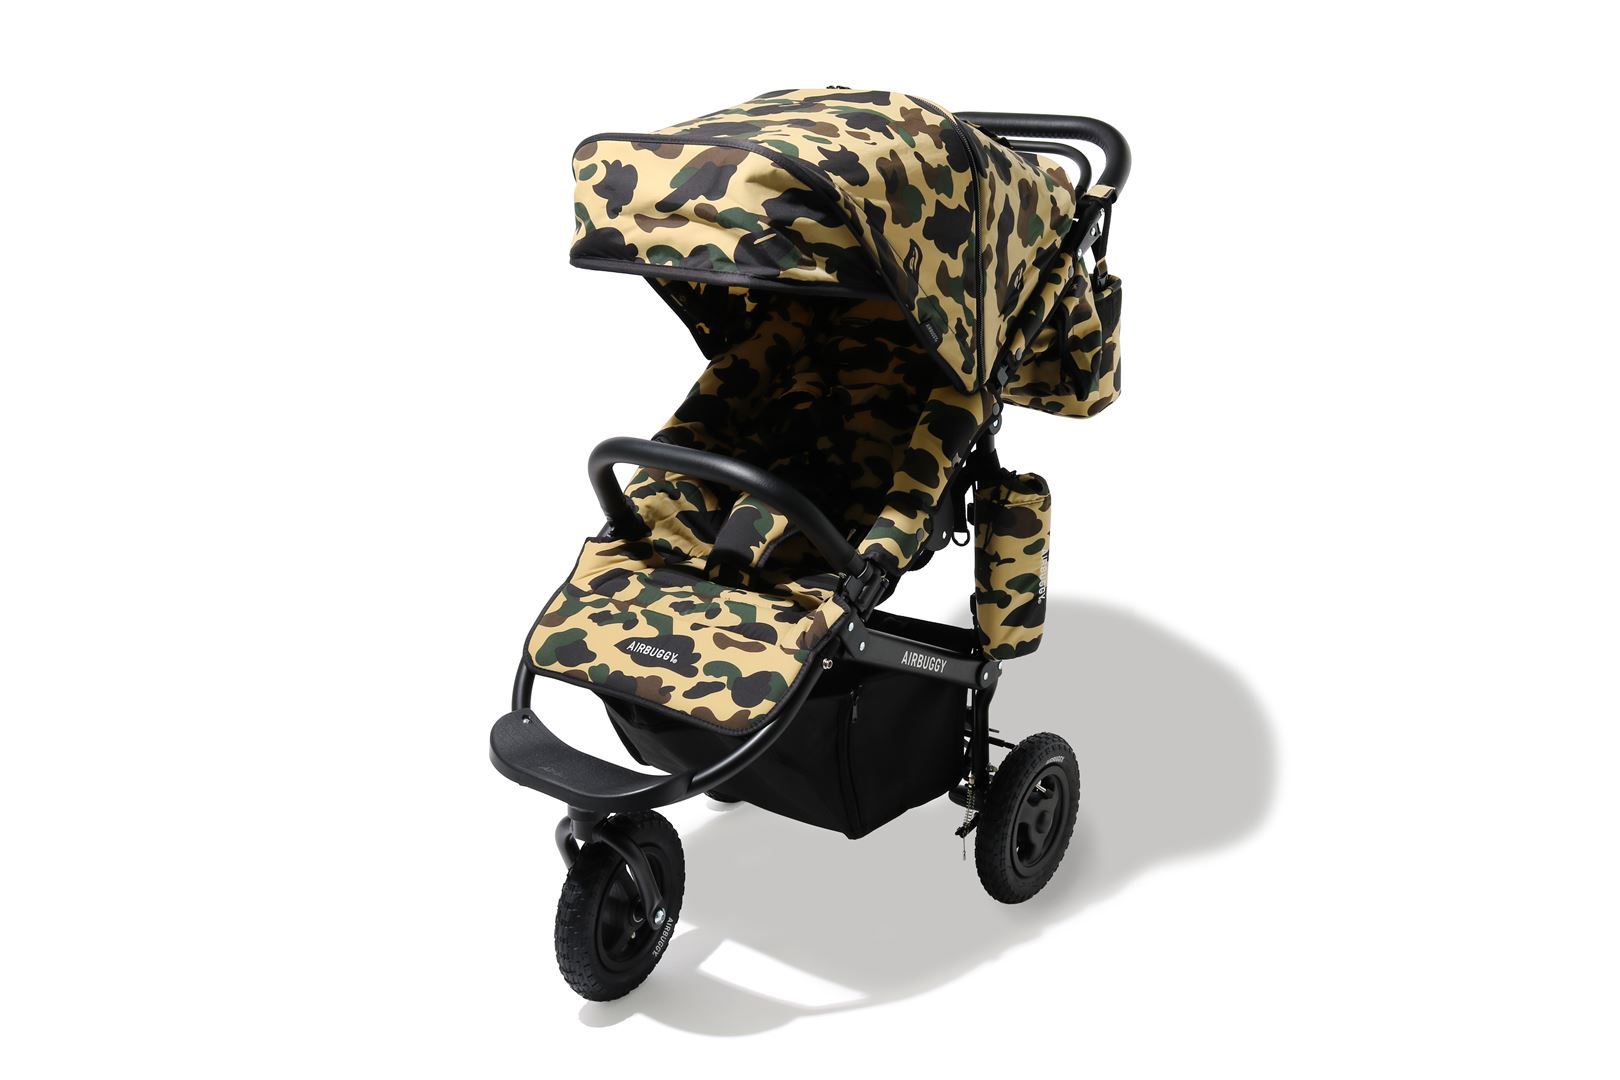 1ST CAMO AIRBUGGY_a0174495_11252461.jpg